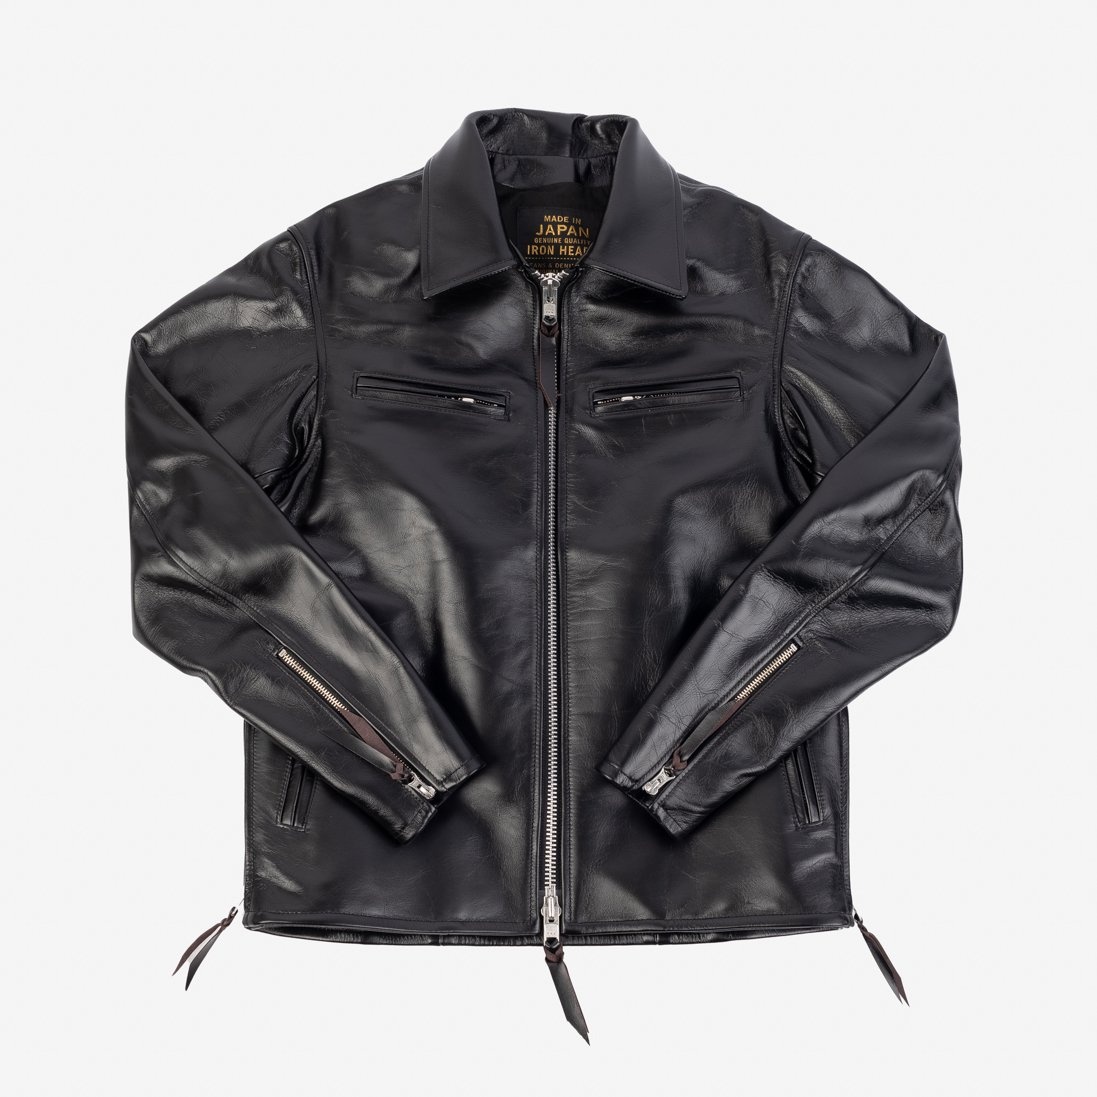 IHJ-54-BLK Japanese Horsehide Rider’s Jacket with Collar - Black (Tea-Core  Dyed)